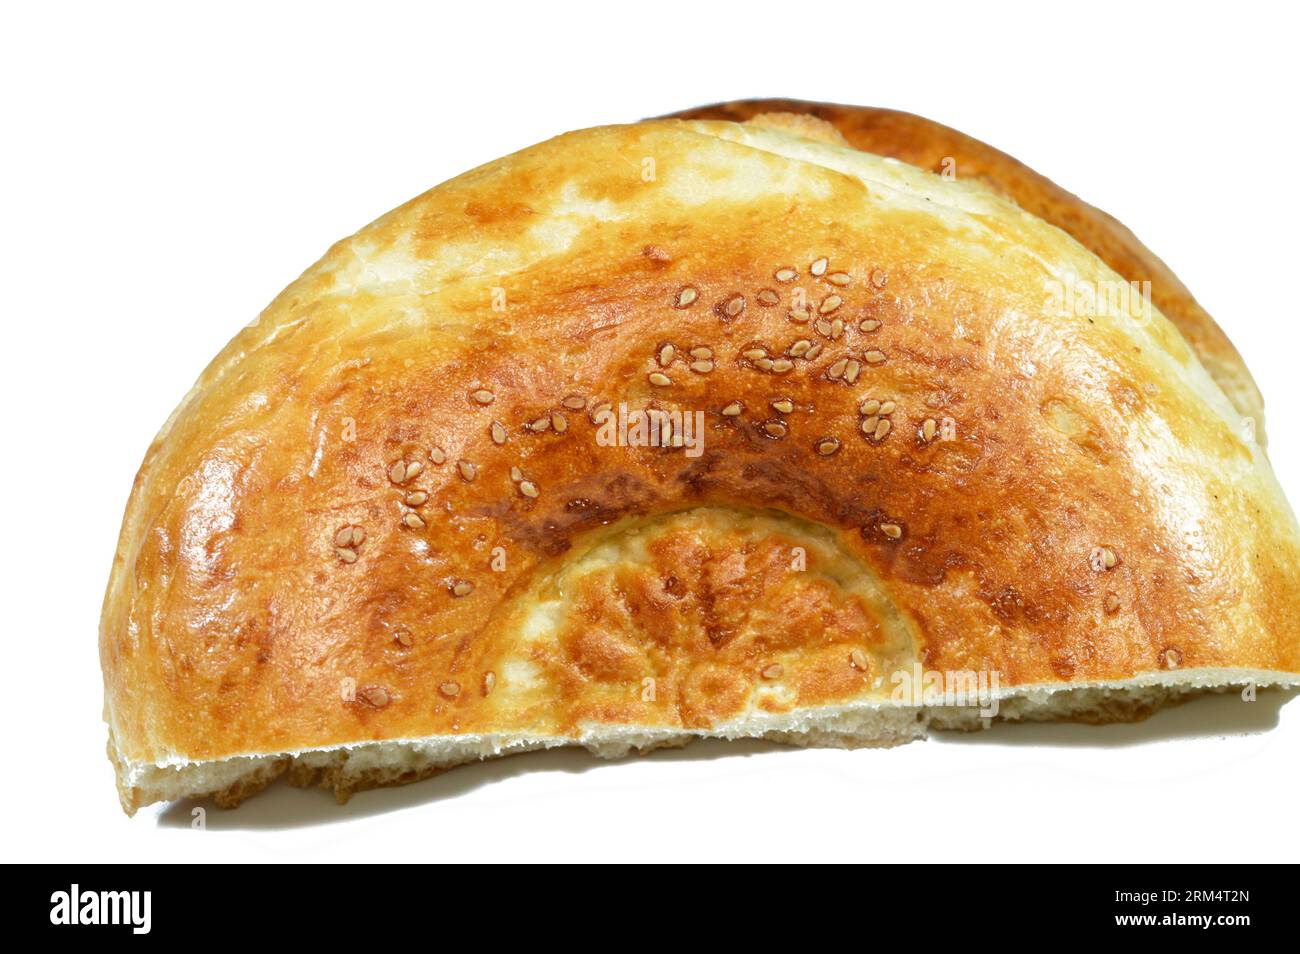 Tandyr nan Uzbek bread, a type of Central Asian bread, often decorated by stamping patterns on the dough by using a bread stamp known as a chekich, al Stock Photo